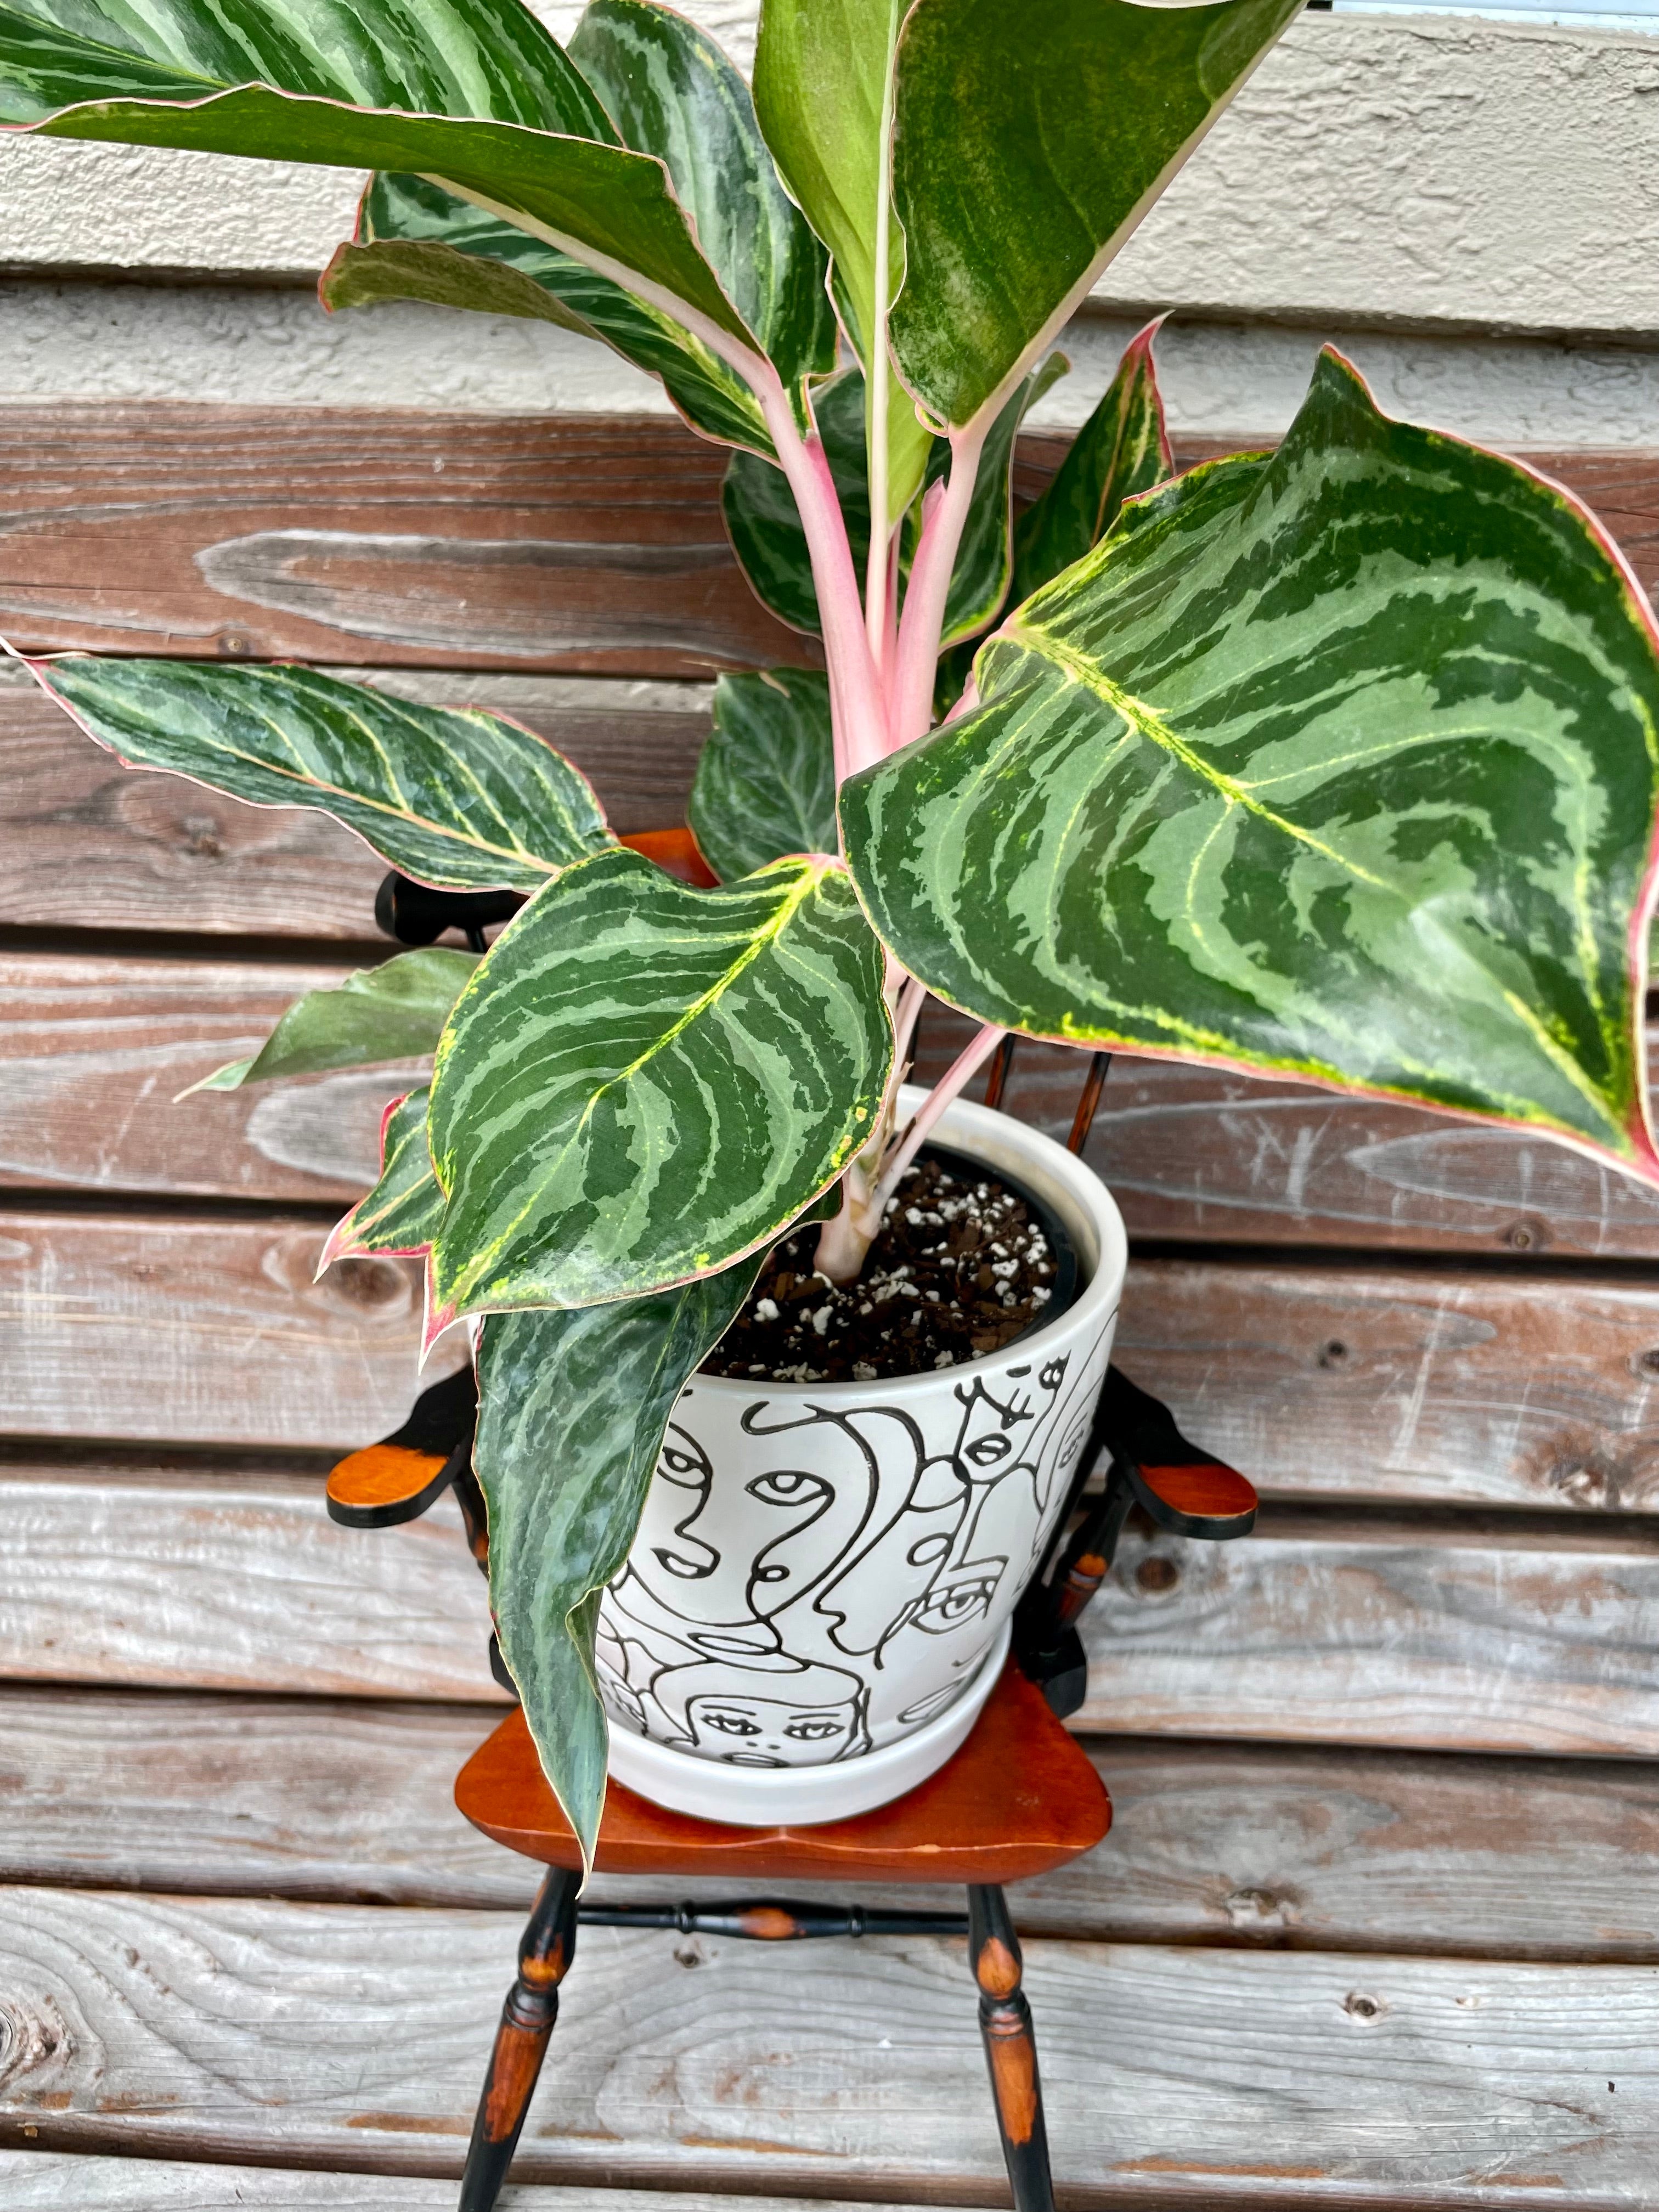 Aglaonema Jazzed Gem In Ceramic Planter- ONLY AVAILABLE INSIDE MUDSLIDE COFFEE